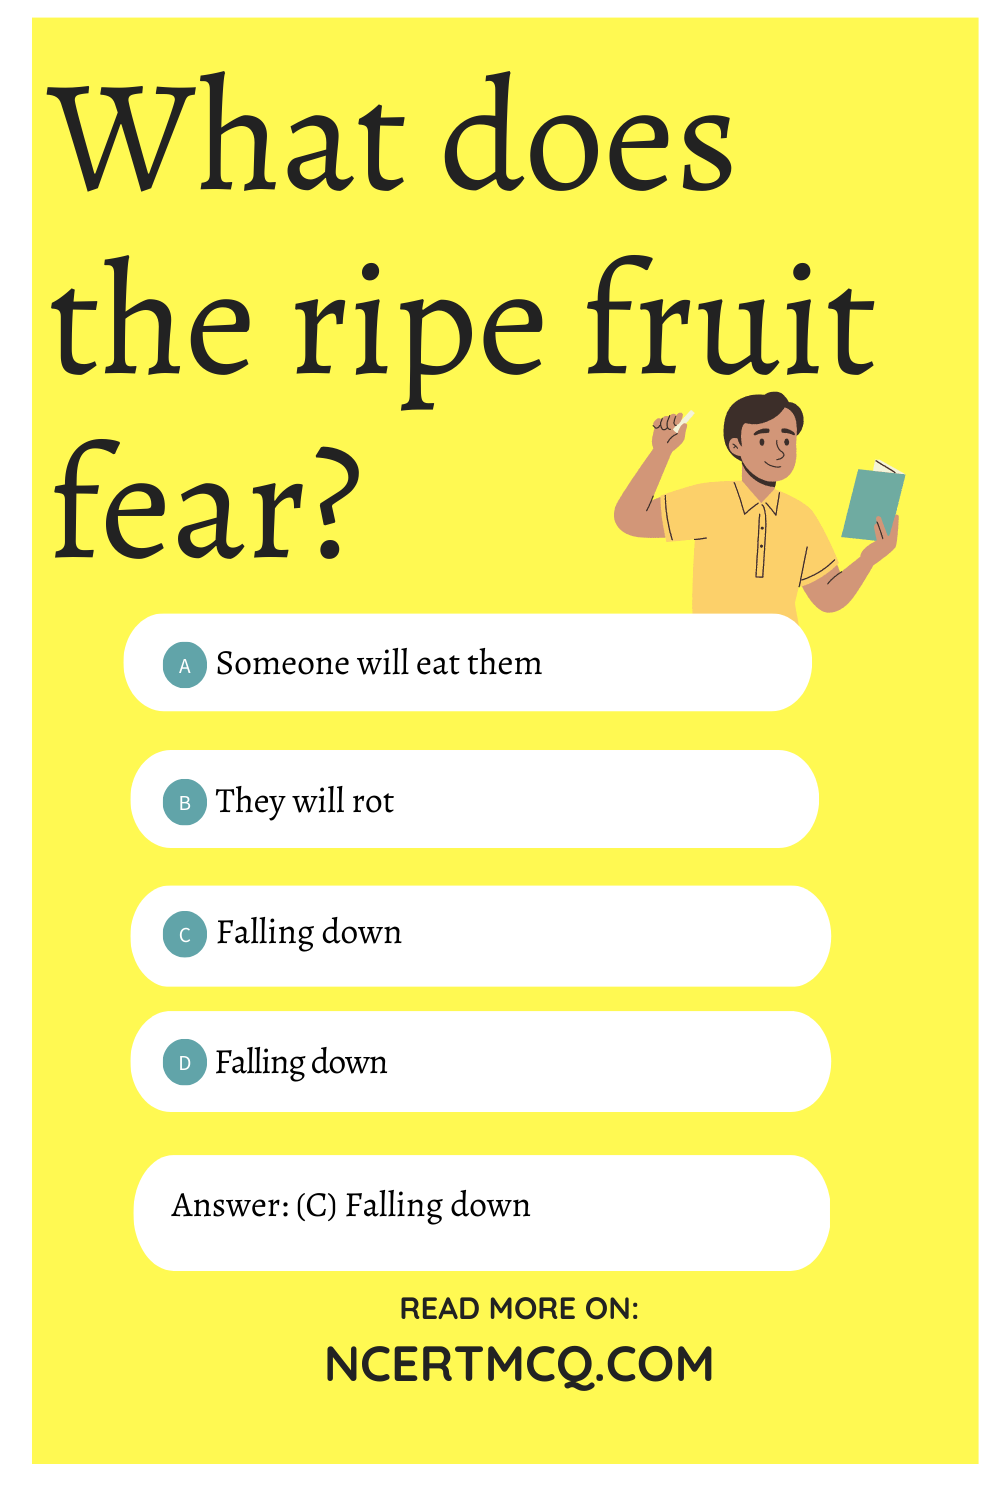 What does the ripe fruit fear?